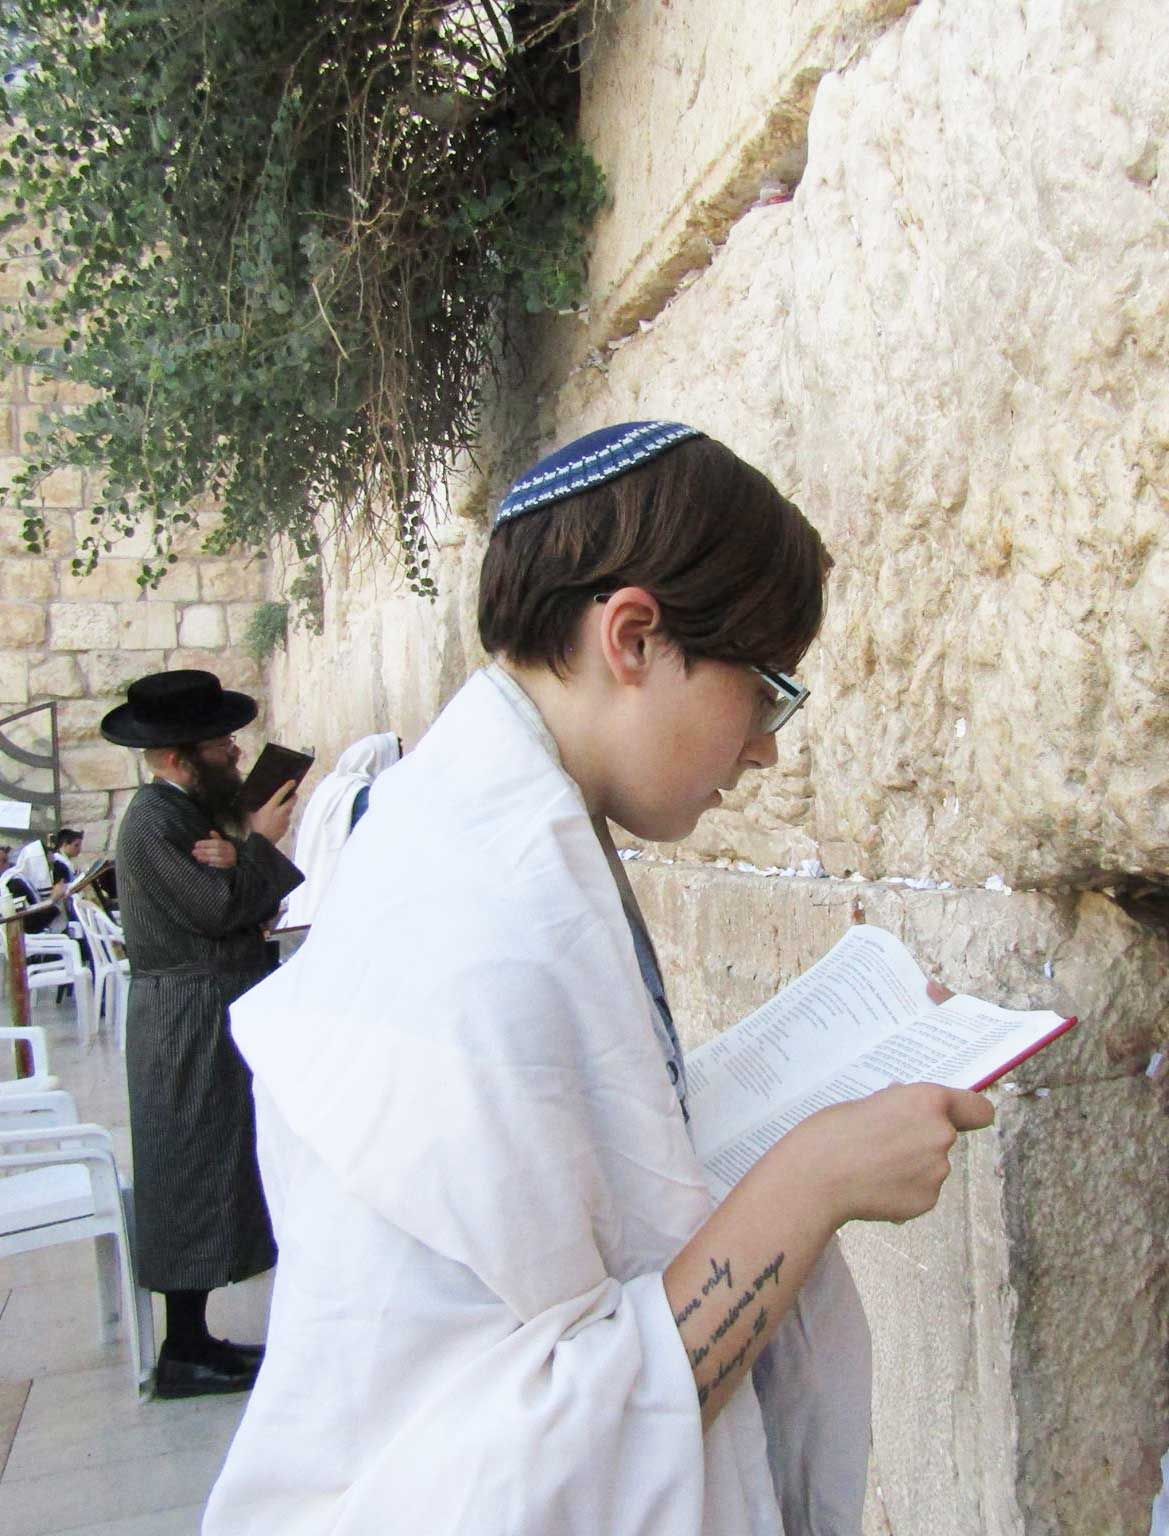 The Gendered Dimensions of Choosing to Wear a Kippah